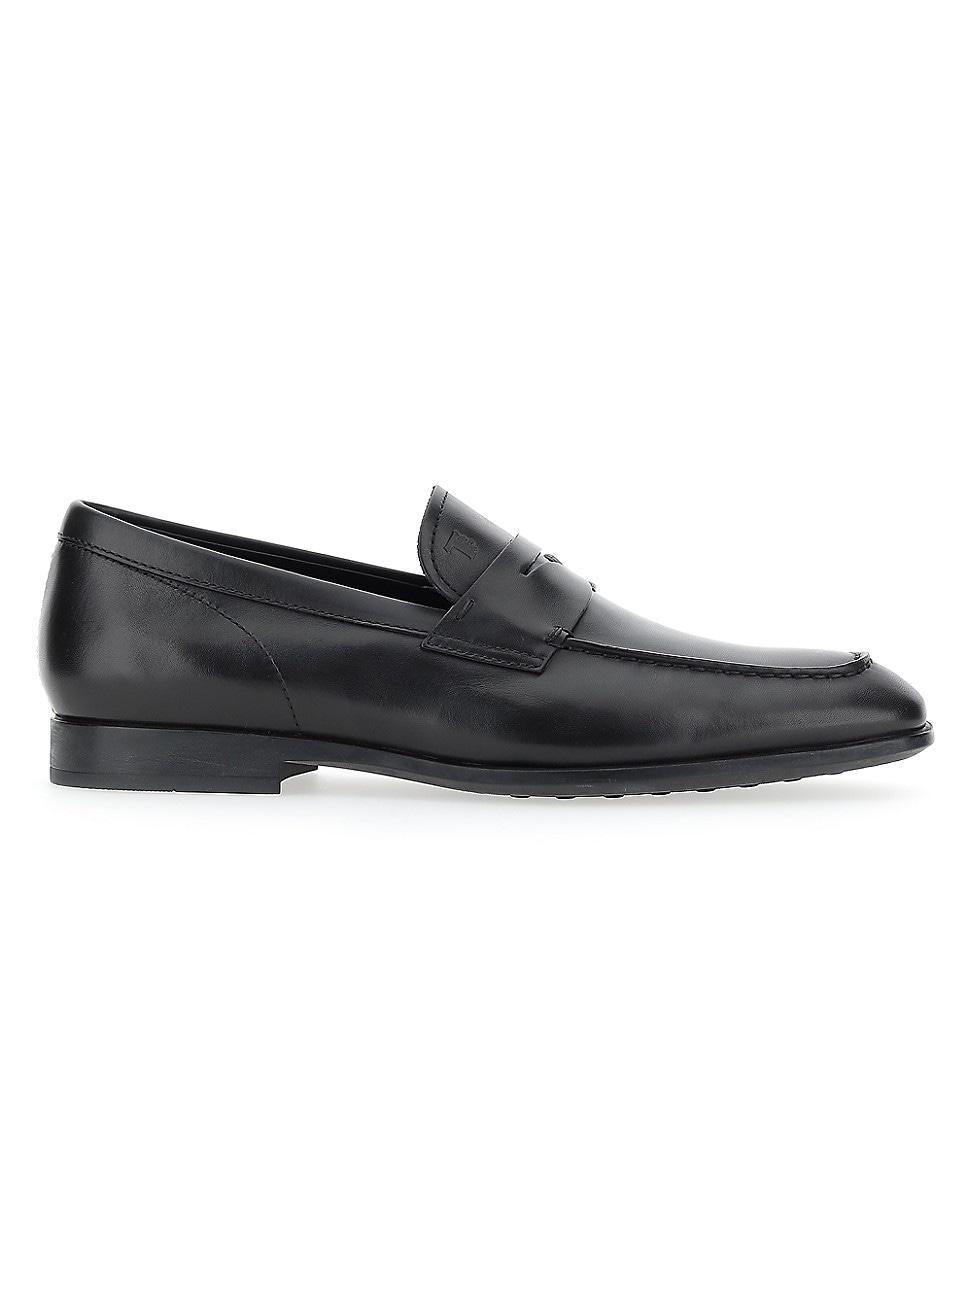 Tods Penny Loafer Product Image